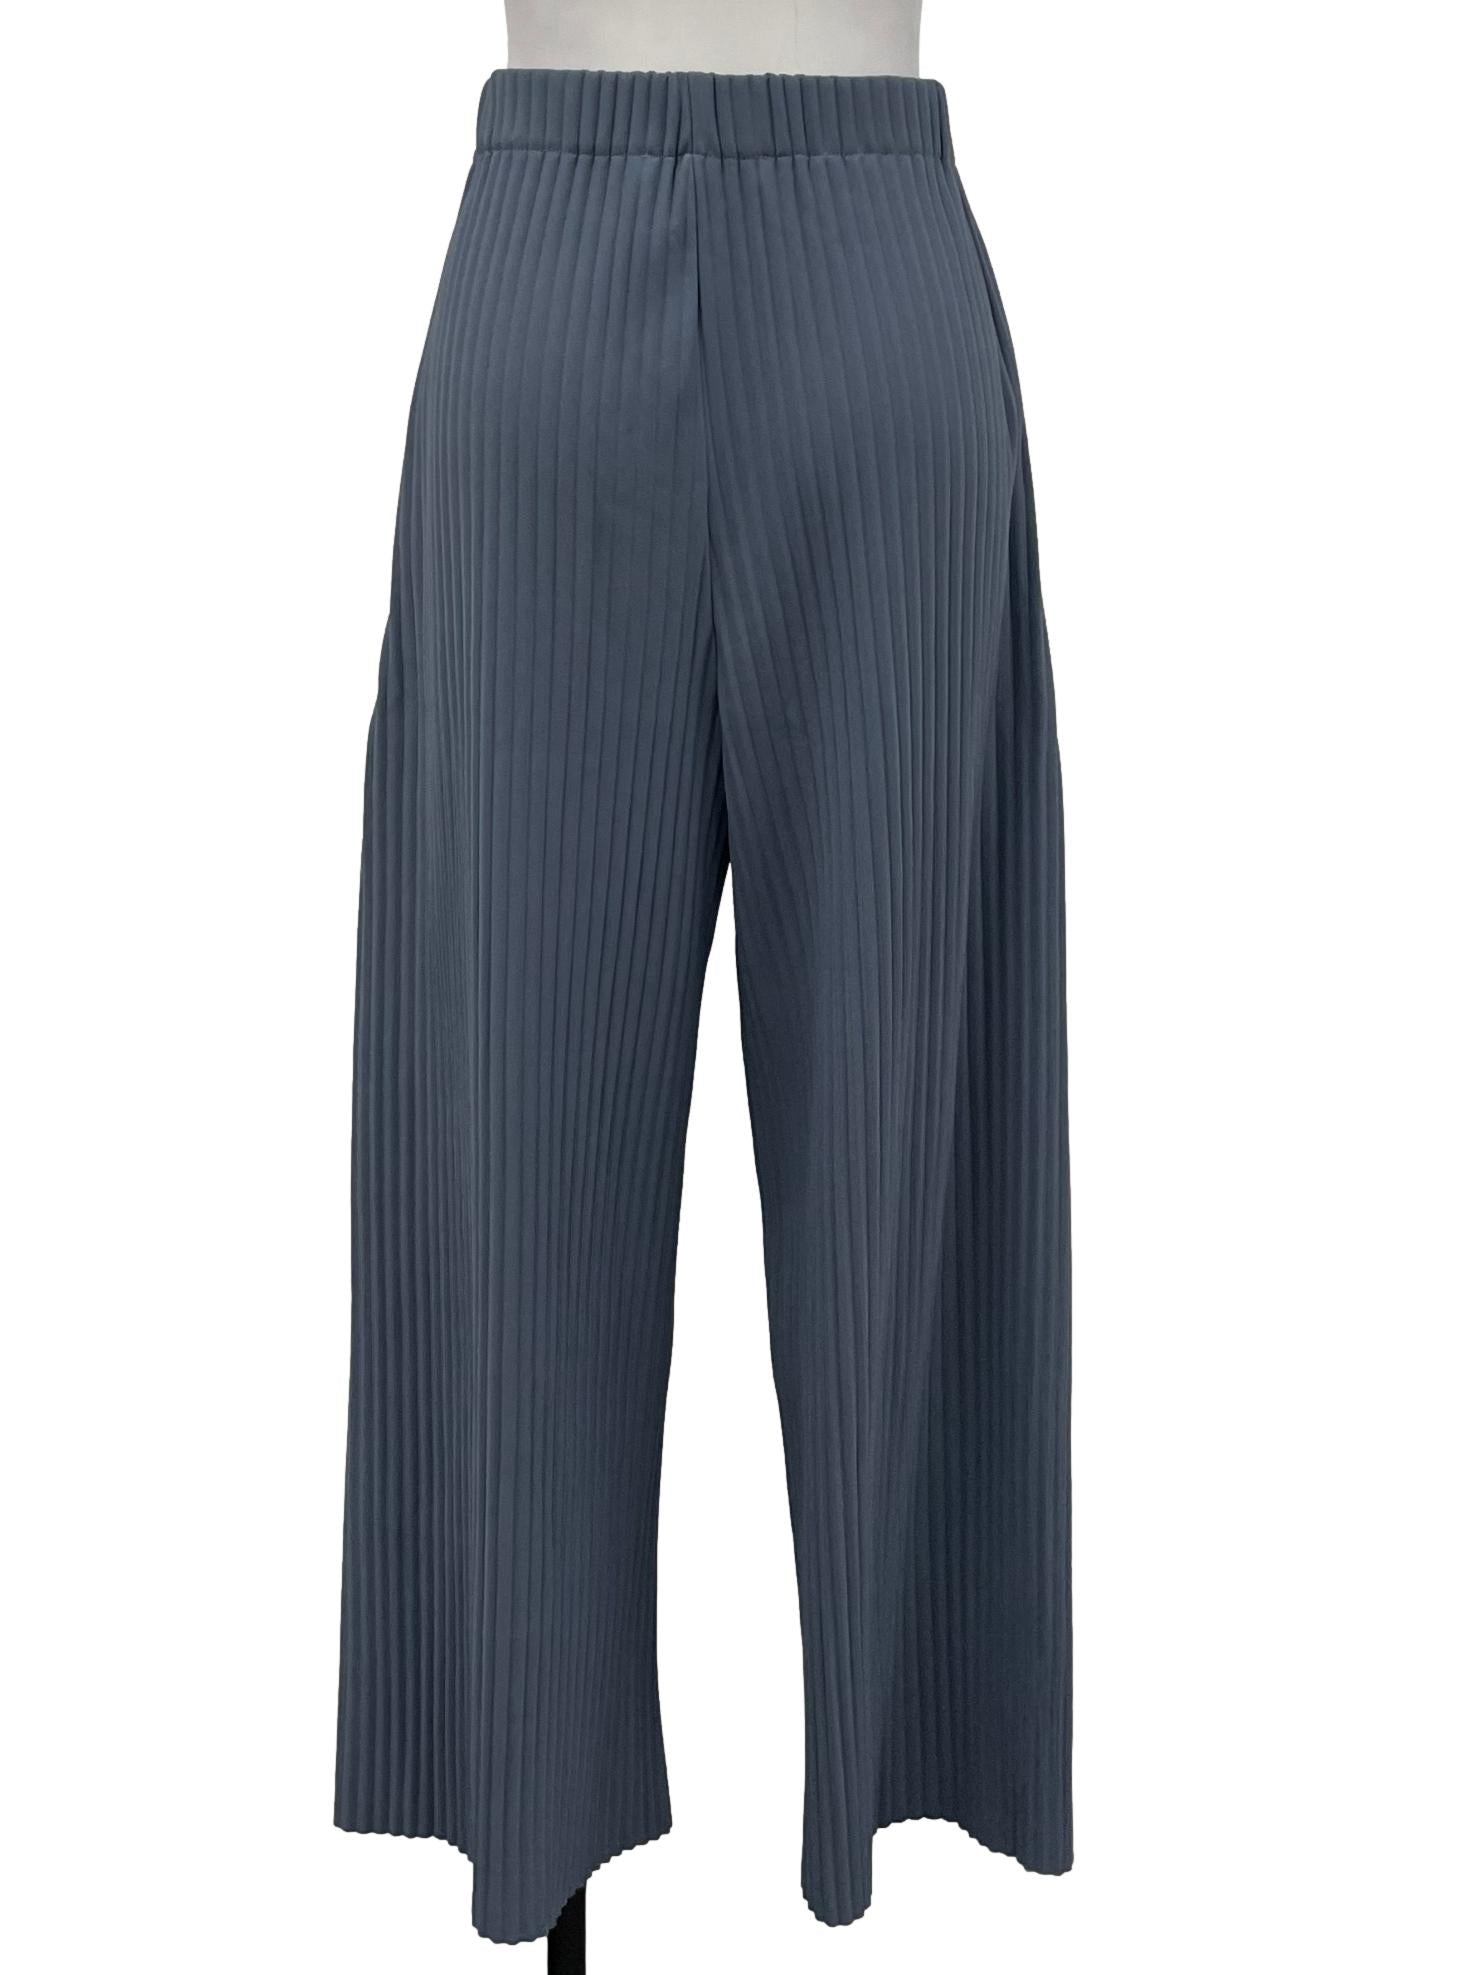 Stone Blue Pleated Stretchy Pants